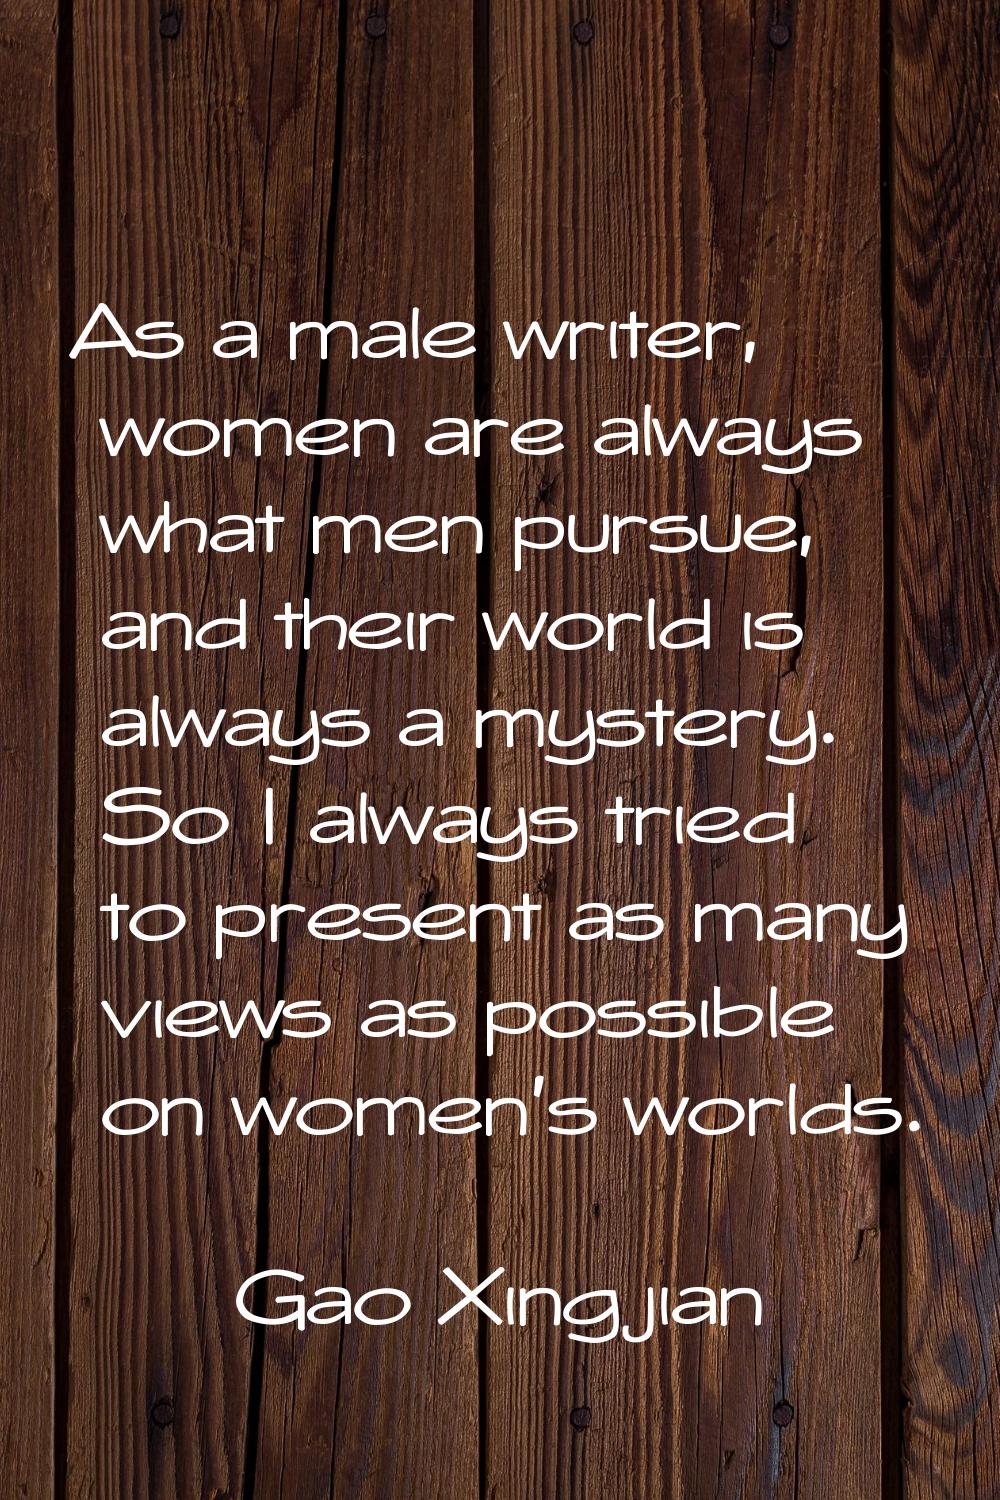 As a male writer, women are always what men pursue, and their world is always a mystery. So I alway